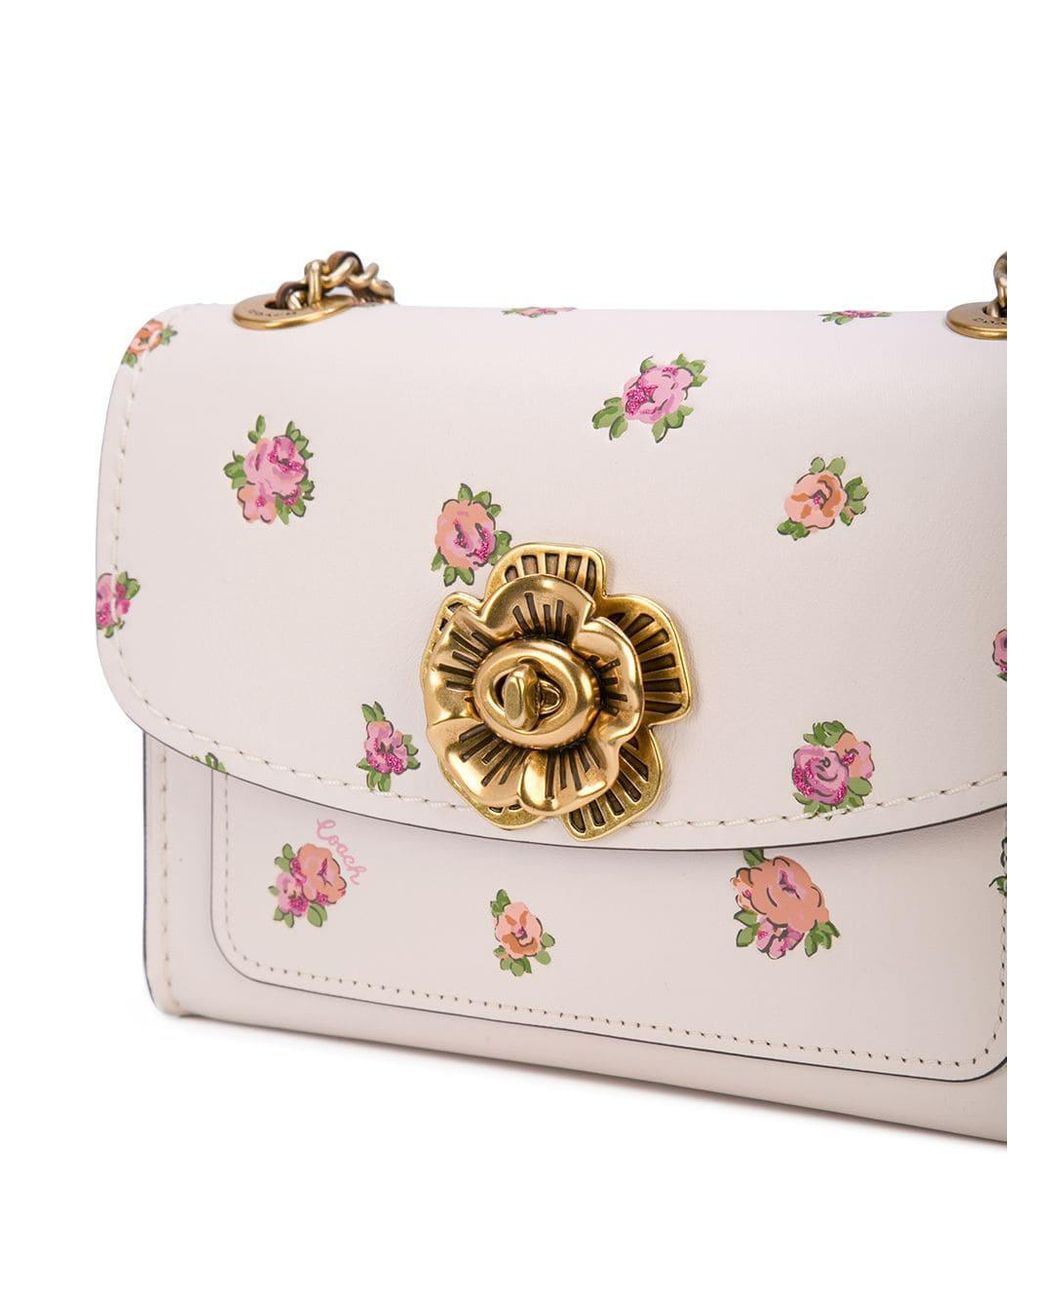 COACH Floral Print Crossbody Bag in White | Lyst